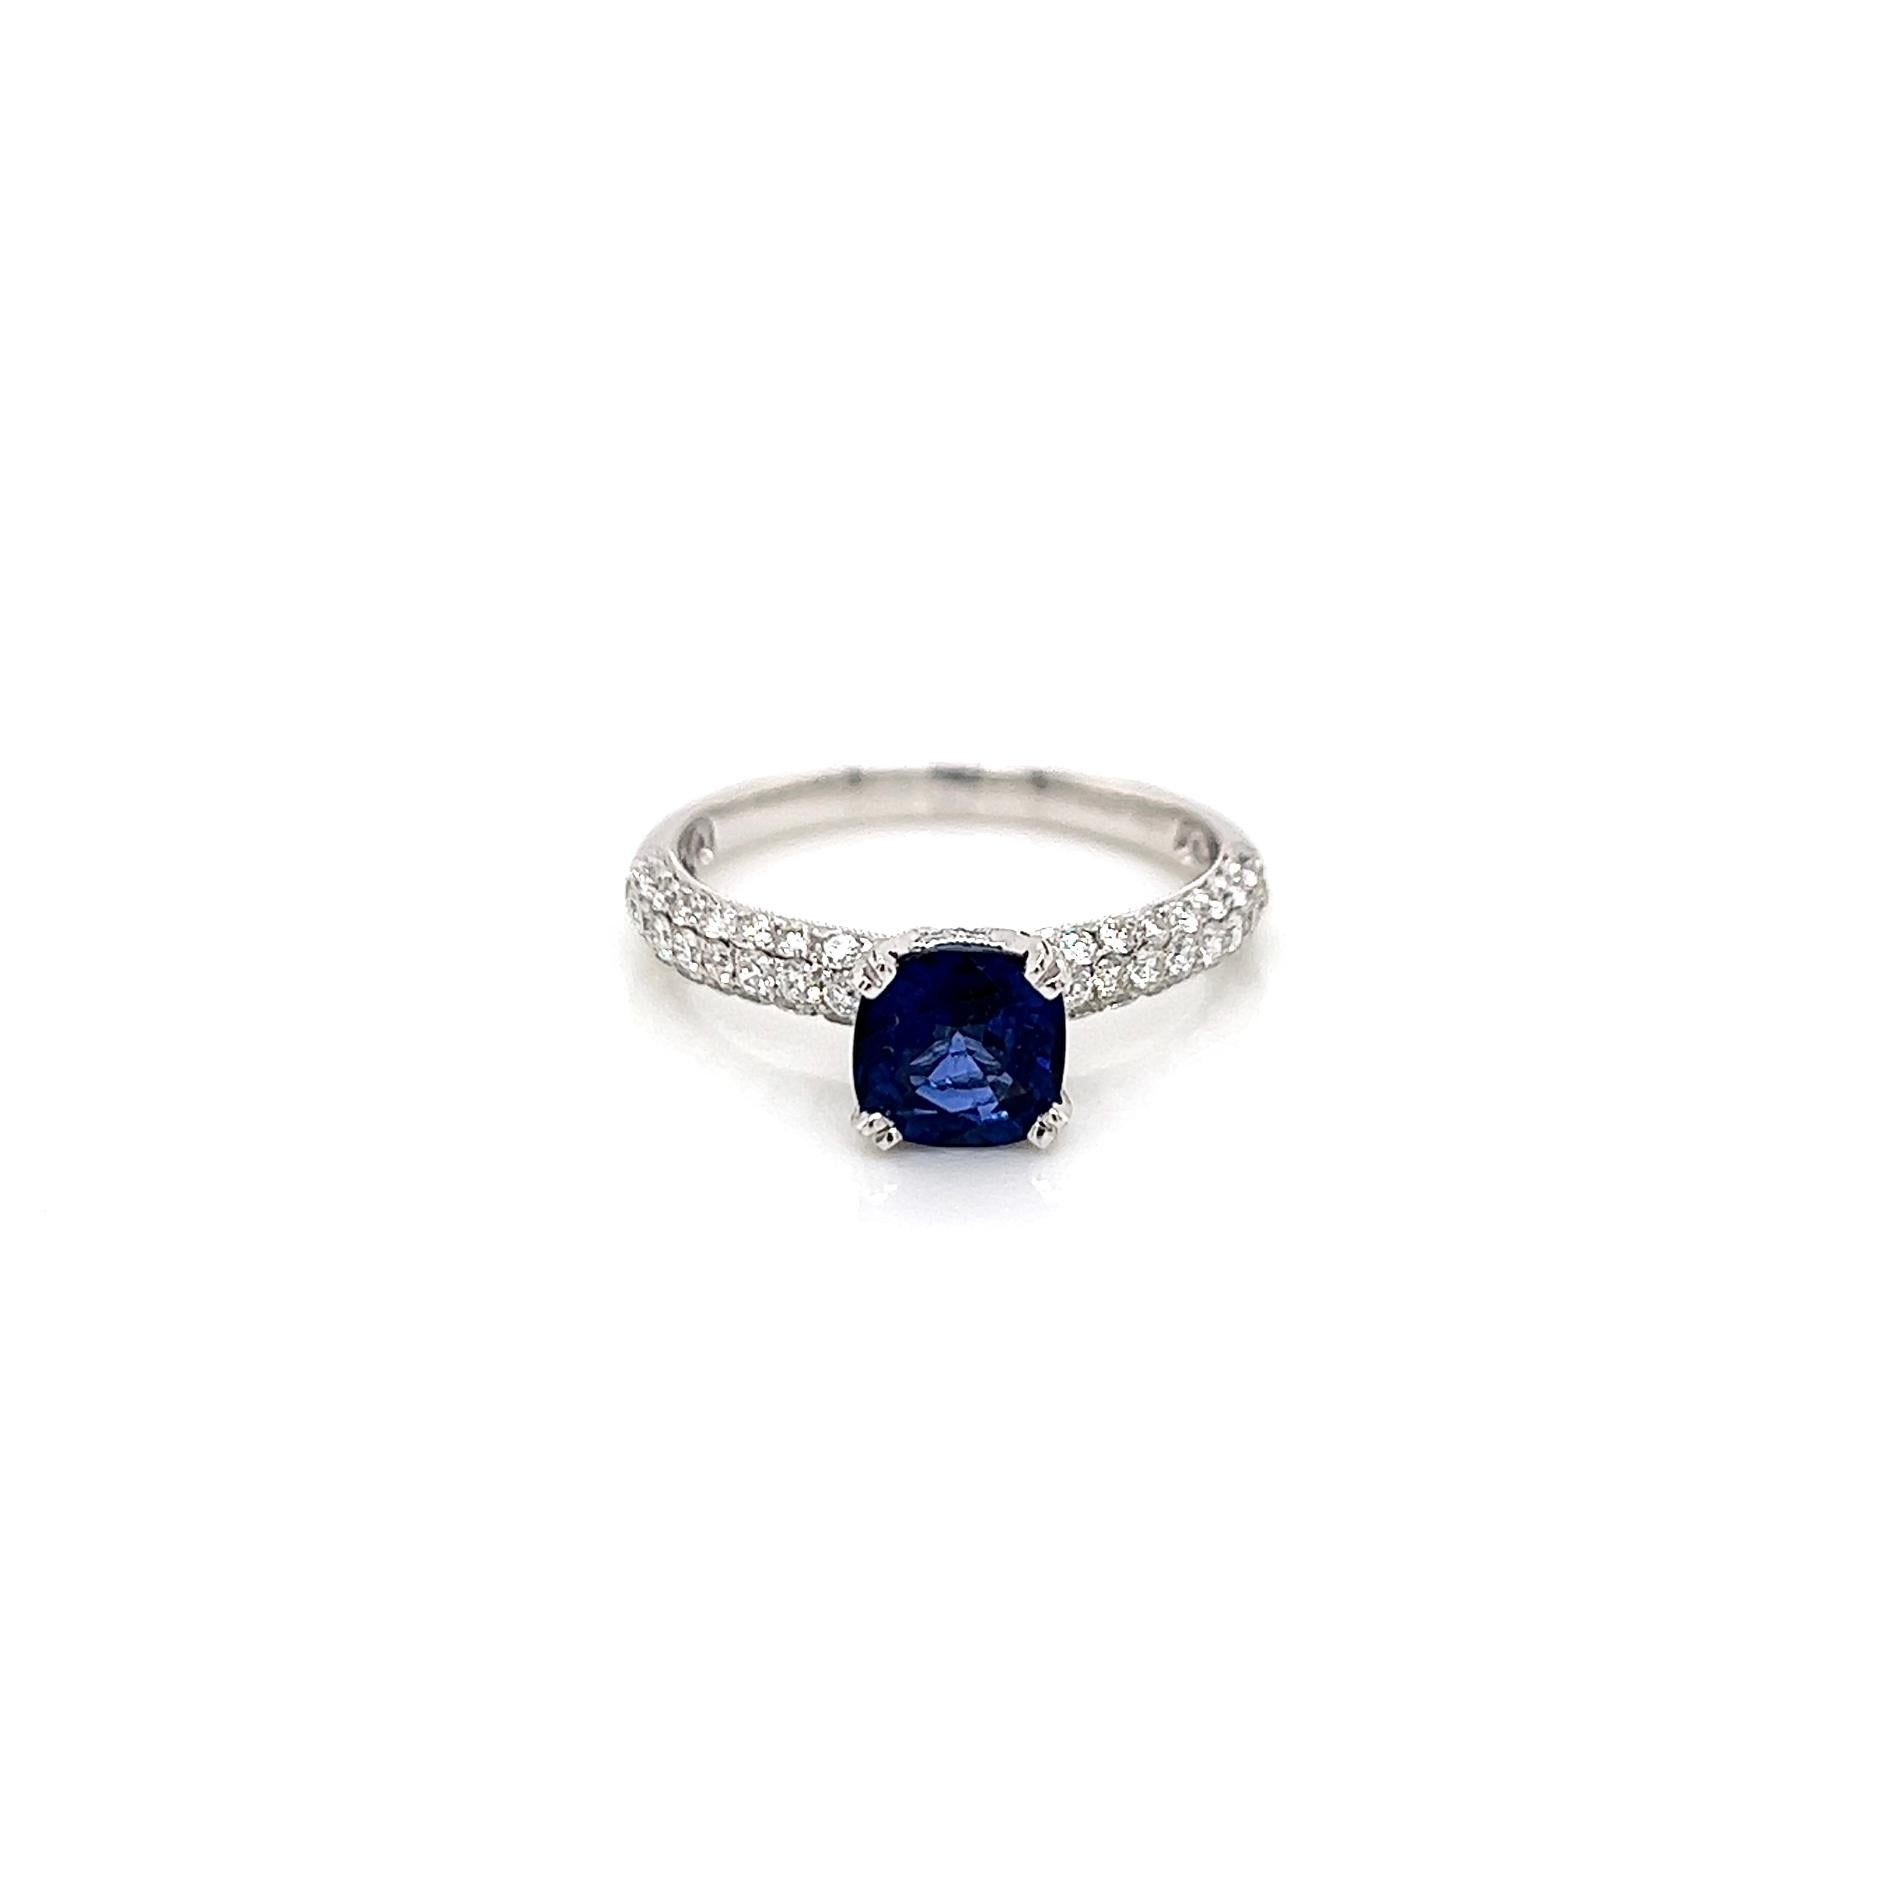 2.05 Total Carat Sapphire Diamond Engagement Ring

-Metal Type: 18K White Gold
-1.25 Carat Cushion Shaped Blue Sapphire
-0.80 Carat Round Side Diamonds 
-Size 7.0
Resizable for an additional fee.

Made in New York City.